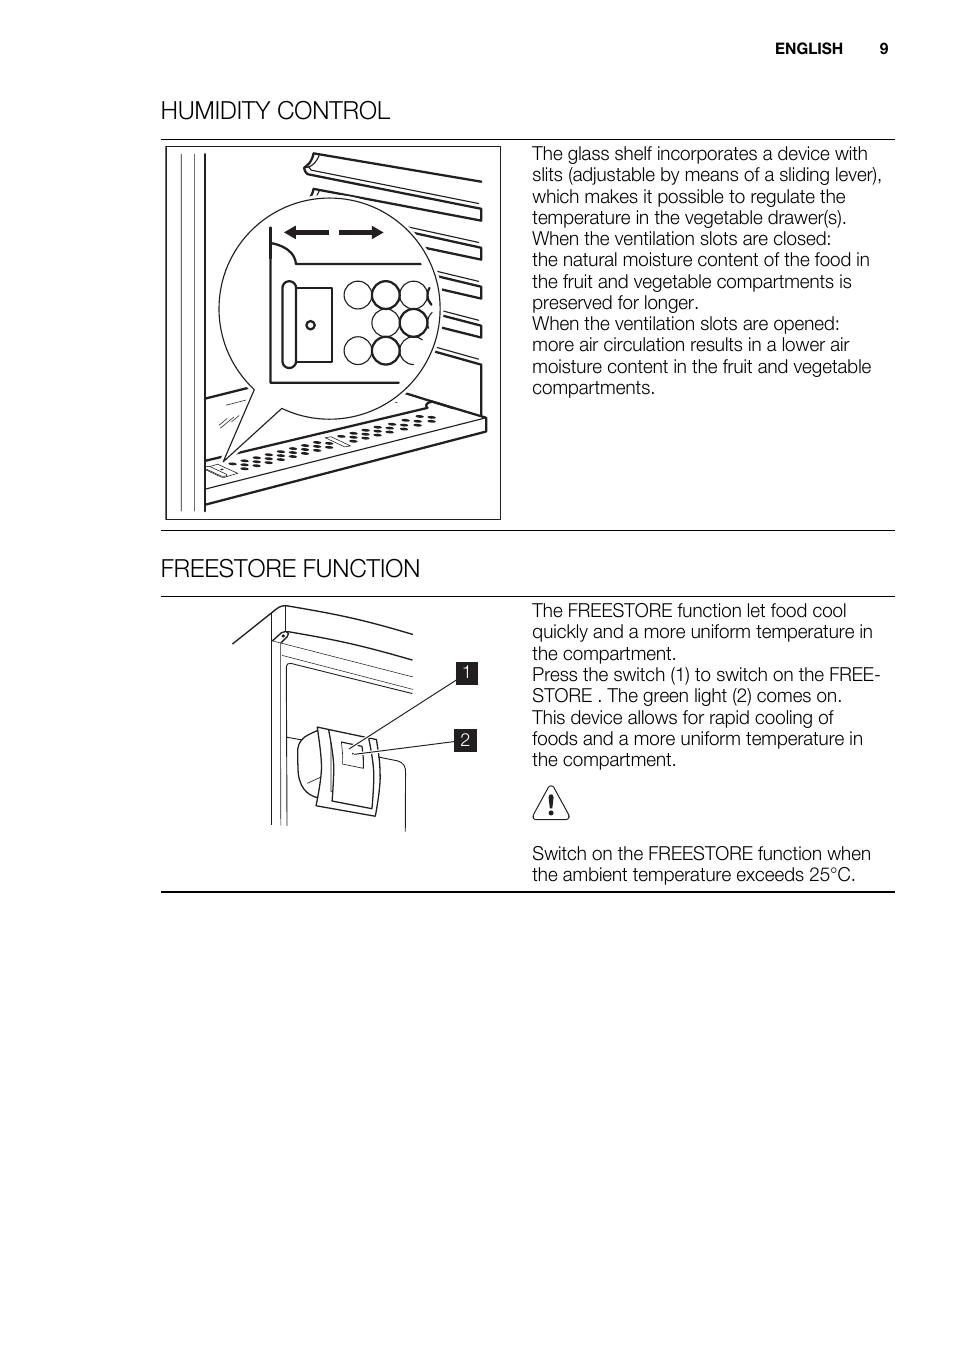 Humidity control, Freestore function | Electrolux ENN2914AOW User Manual |  Page 9 / 80